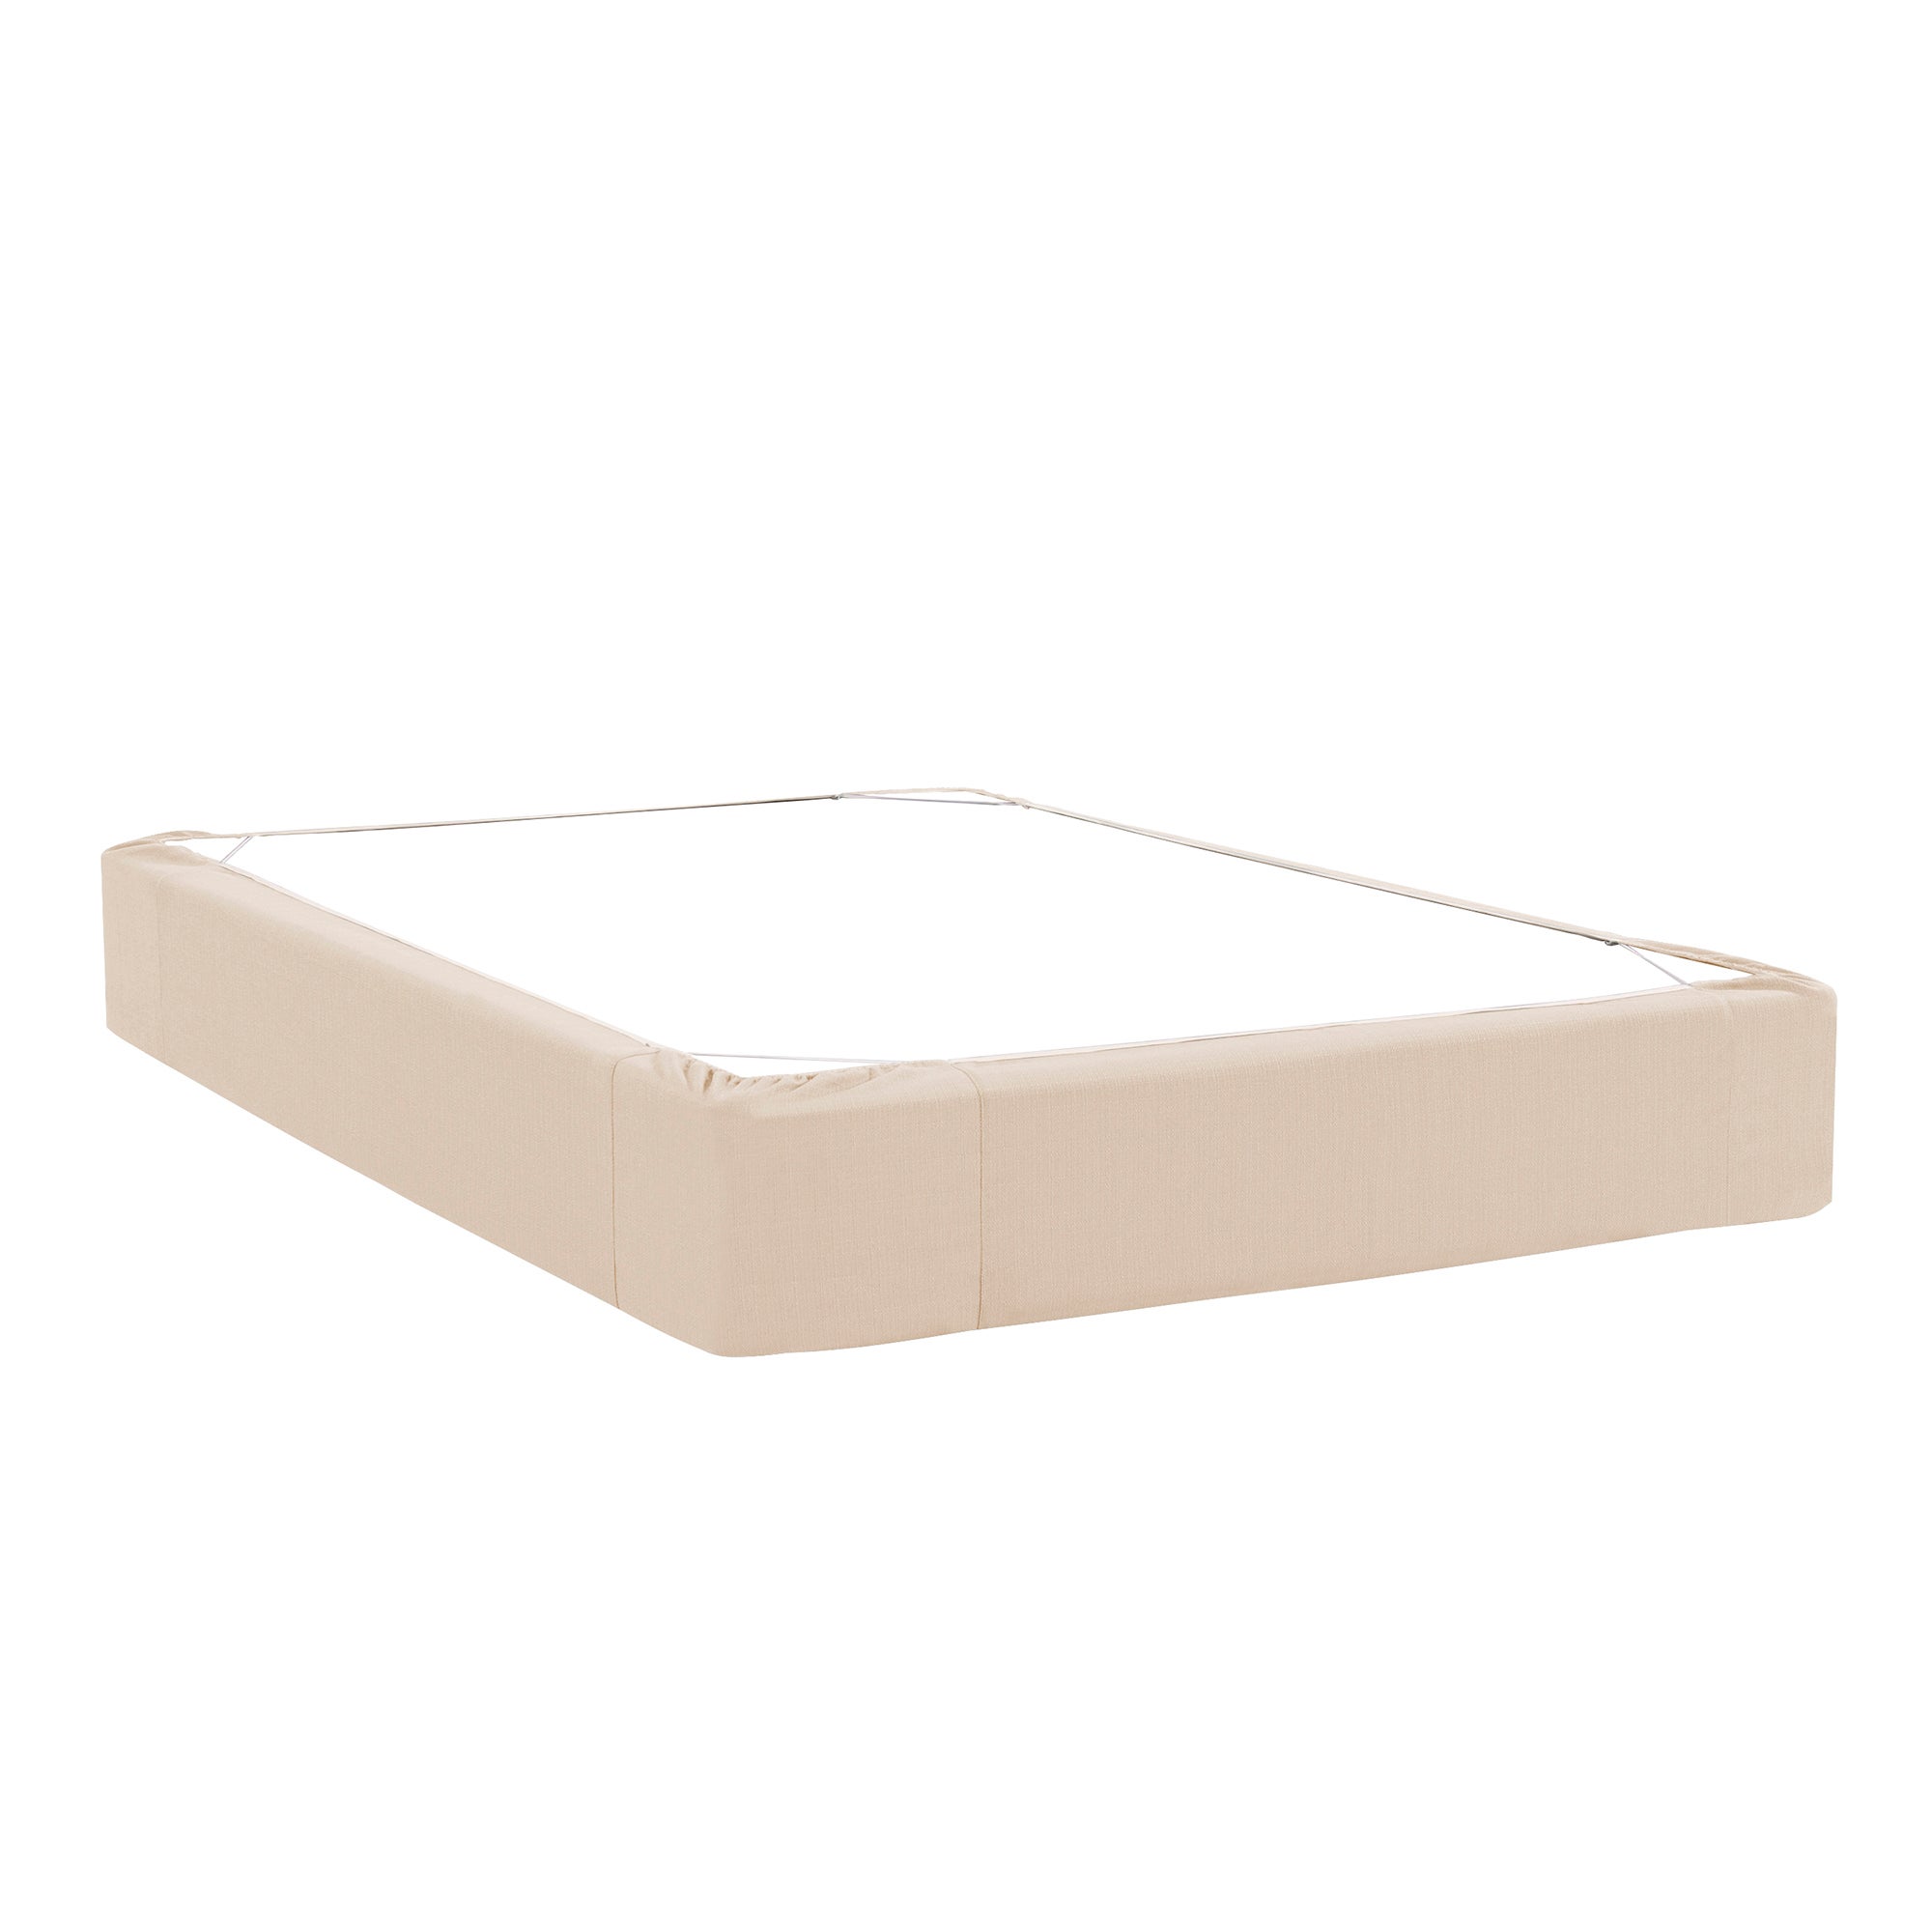 Accent Furniture - Boxspring Covers | The Howard Elliott Collection